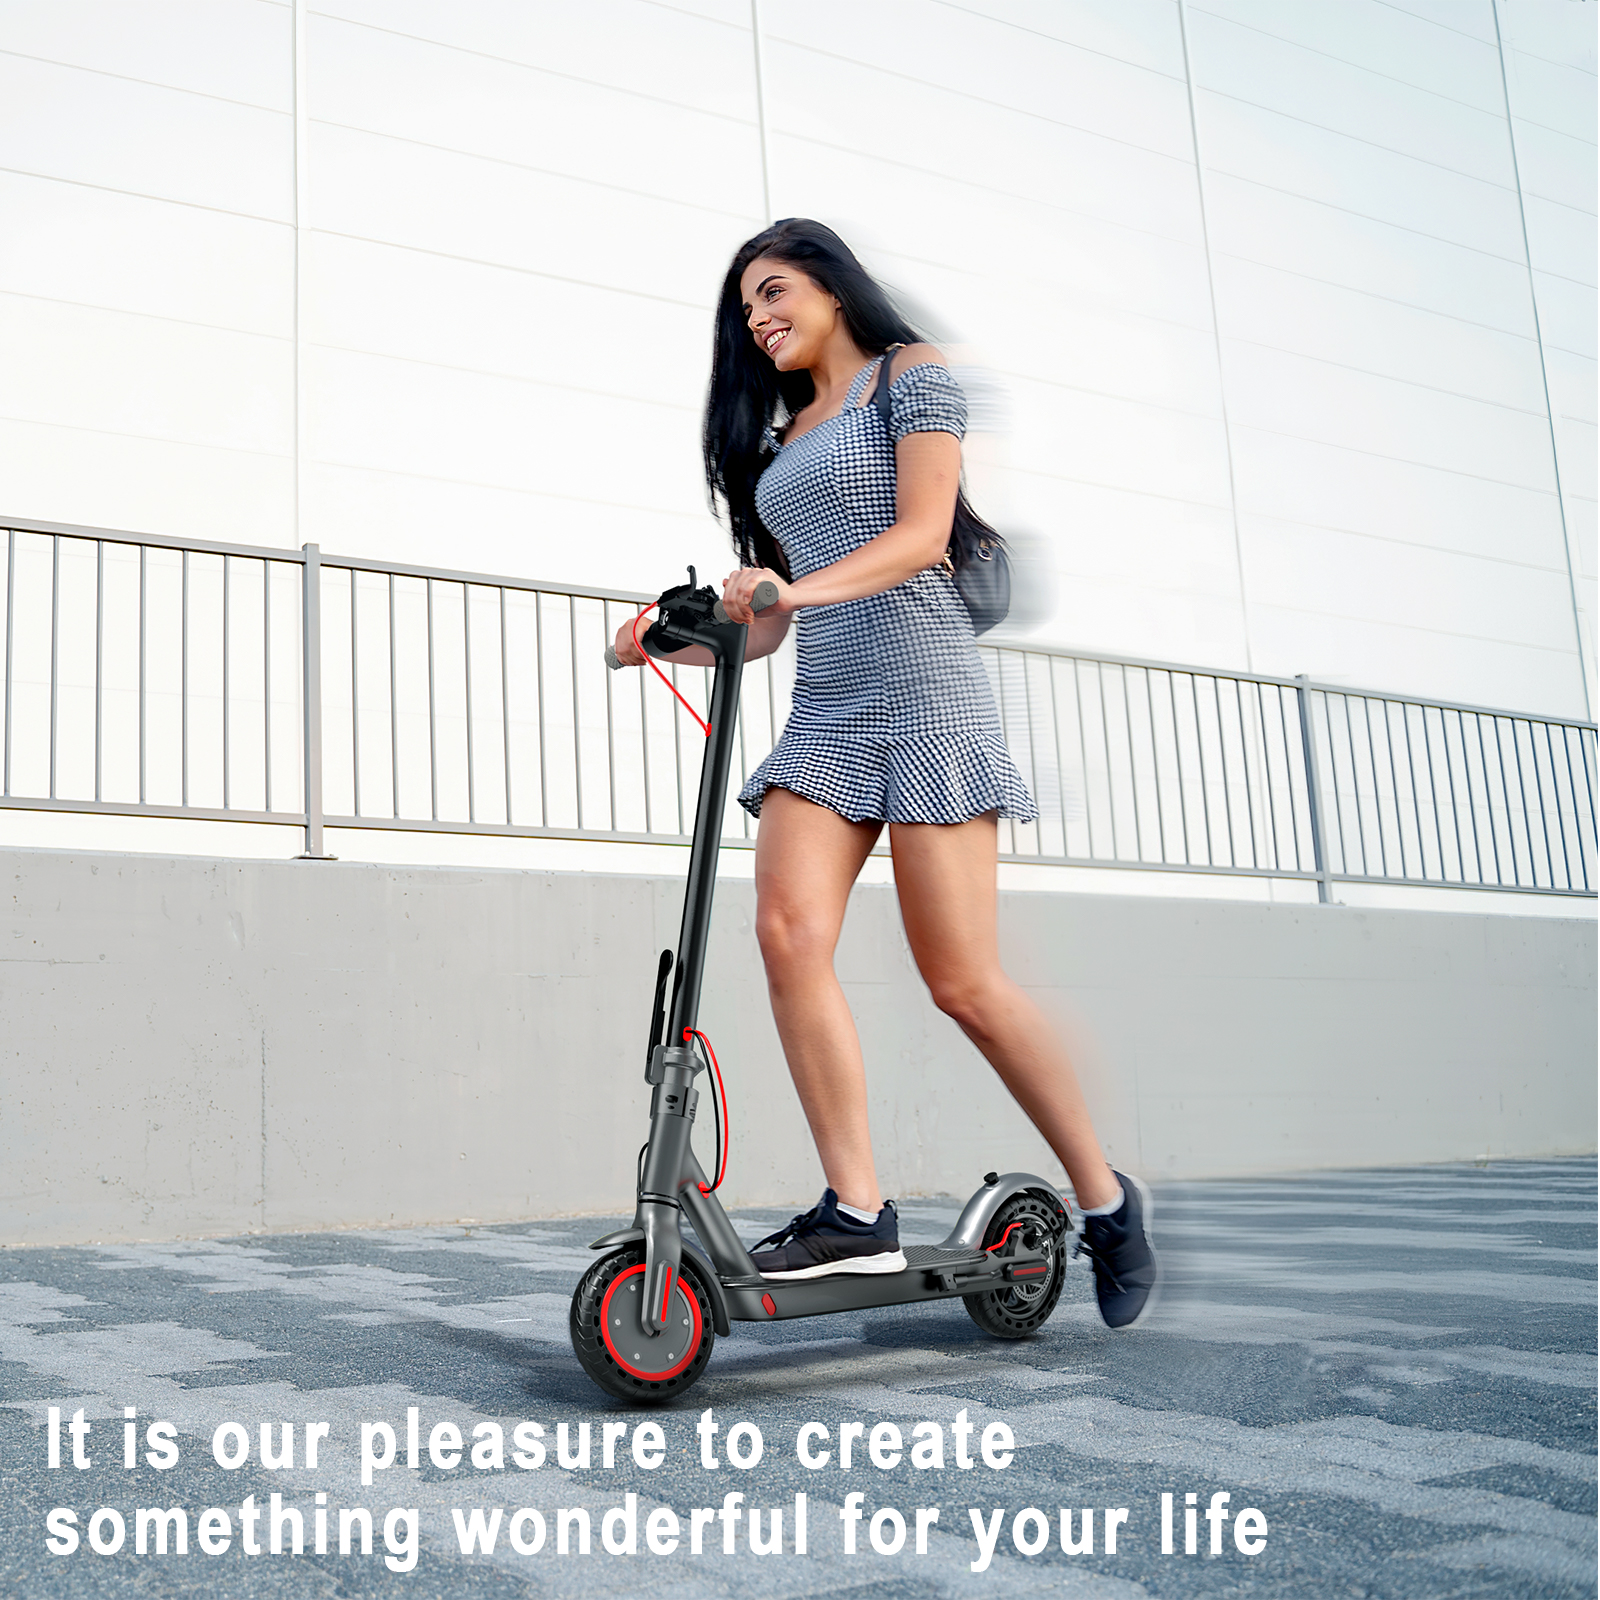 AOVOPRO ES80 350W 8.5' Foldable Electric Scooter for Adults and Child, 21 Miles Range - image 4 of 9